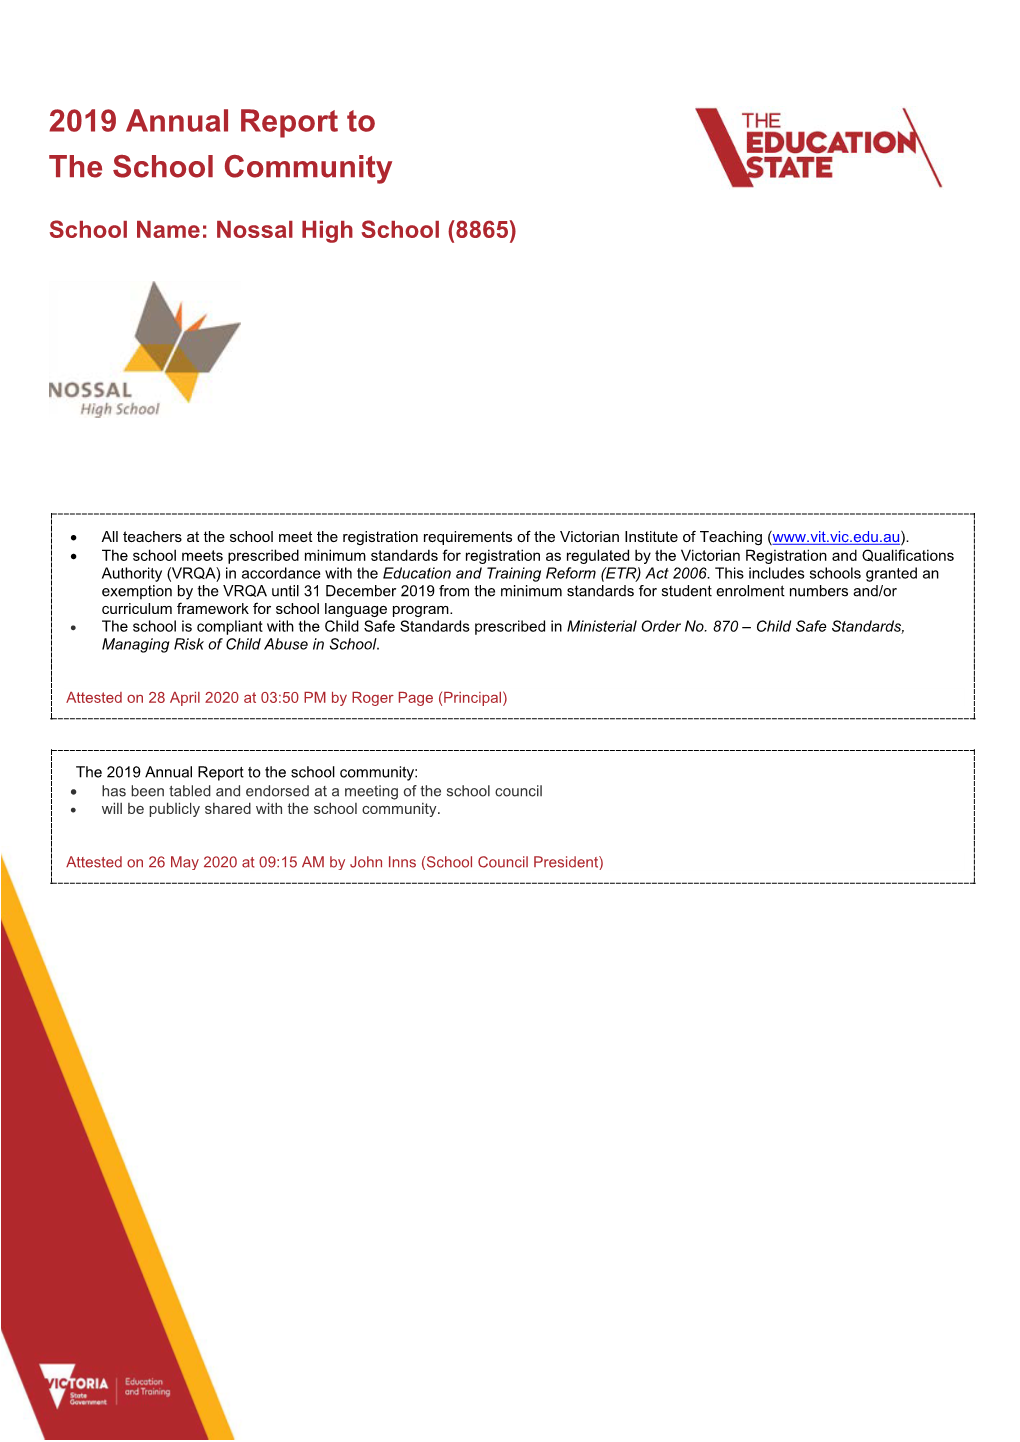 2019 Annual Report to the School Community